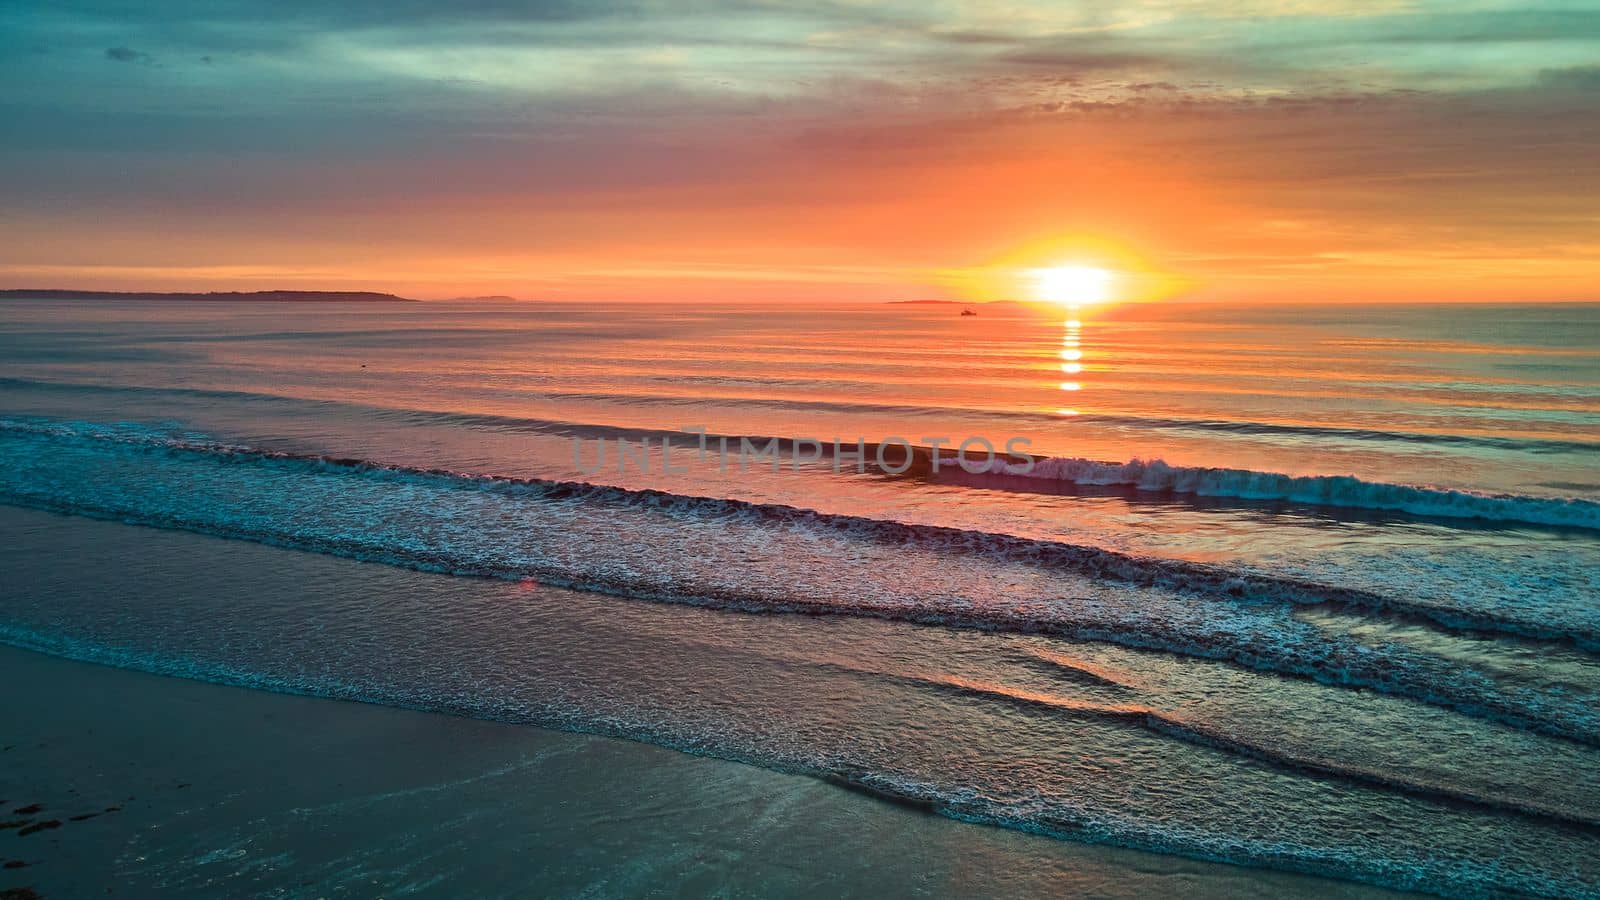 Magical sunrise aerial over beach with ocean waves in Maine by njproductions